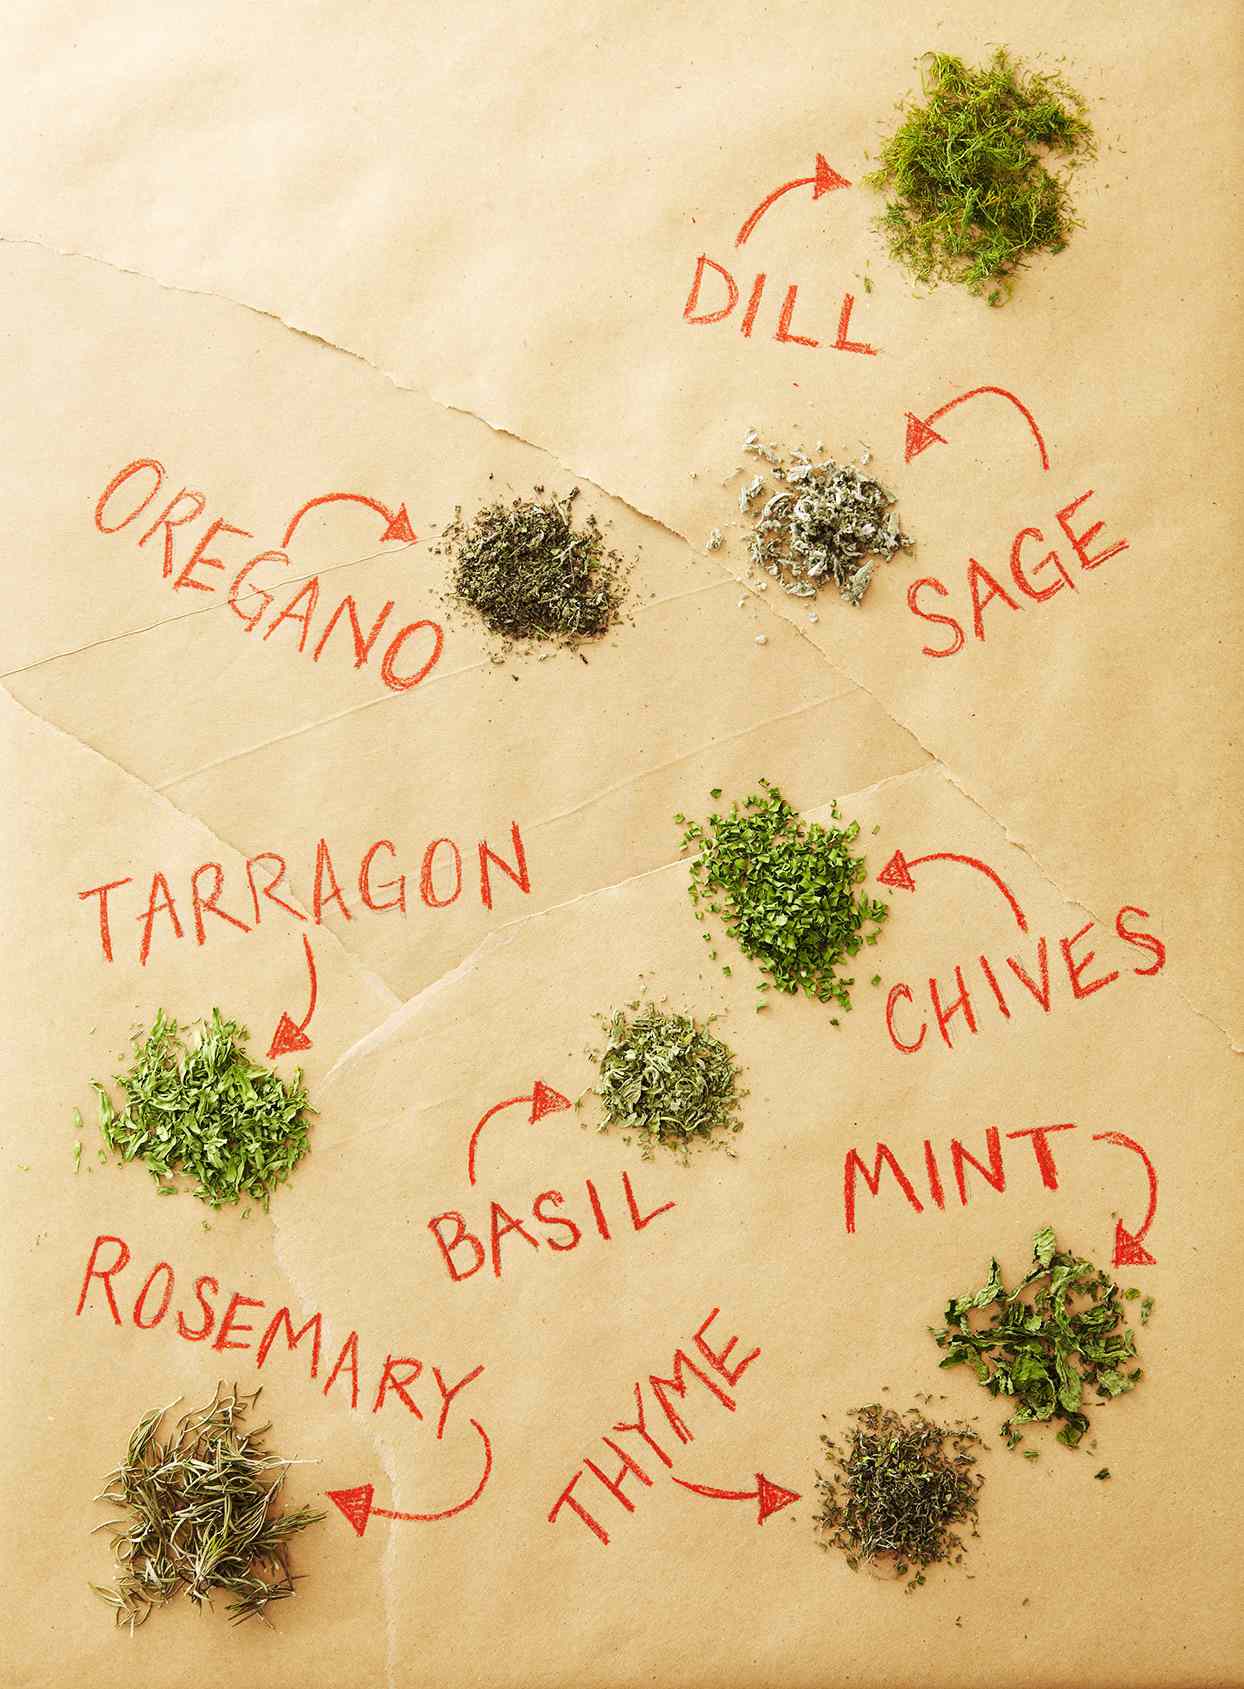 labeled herb trimmings